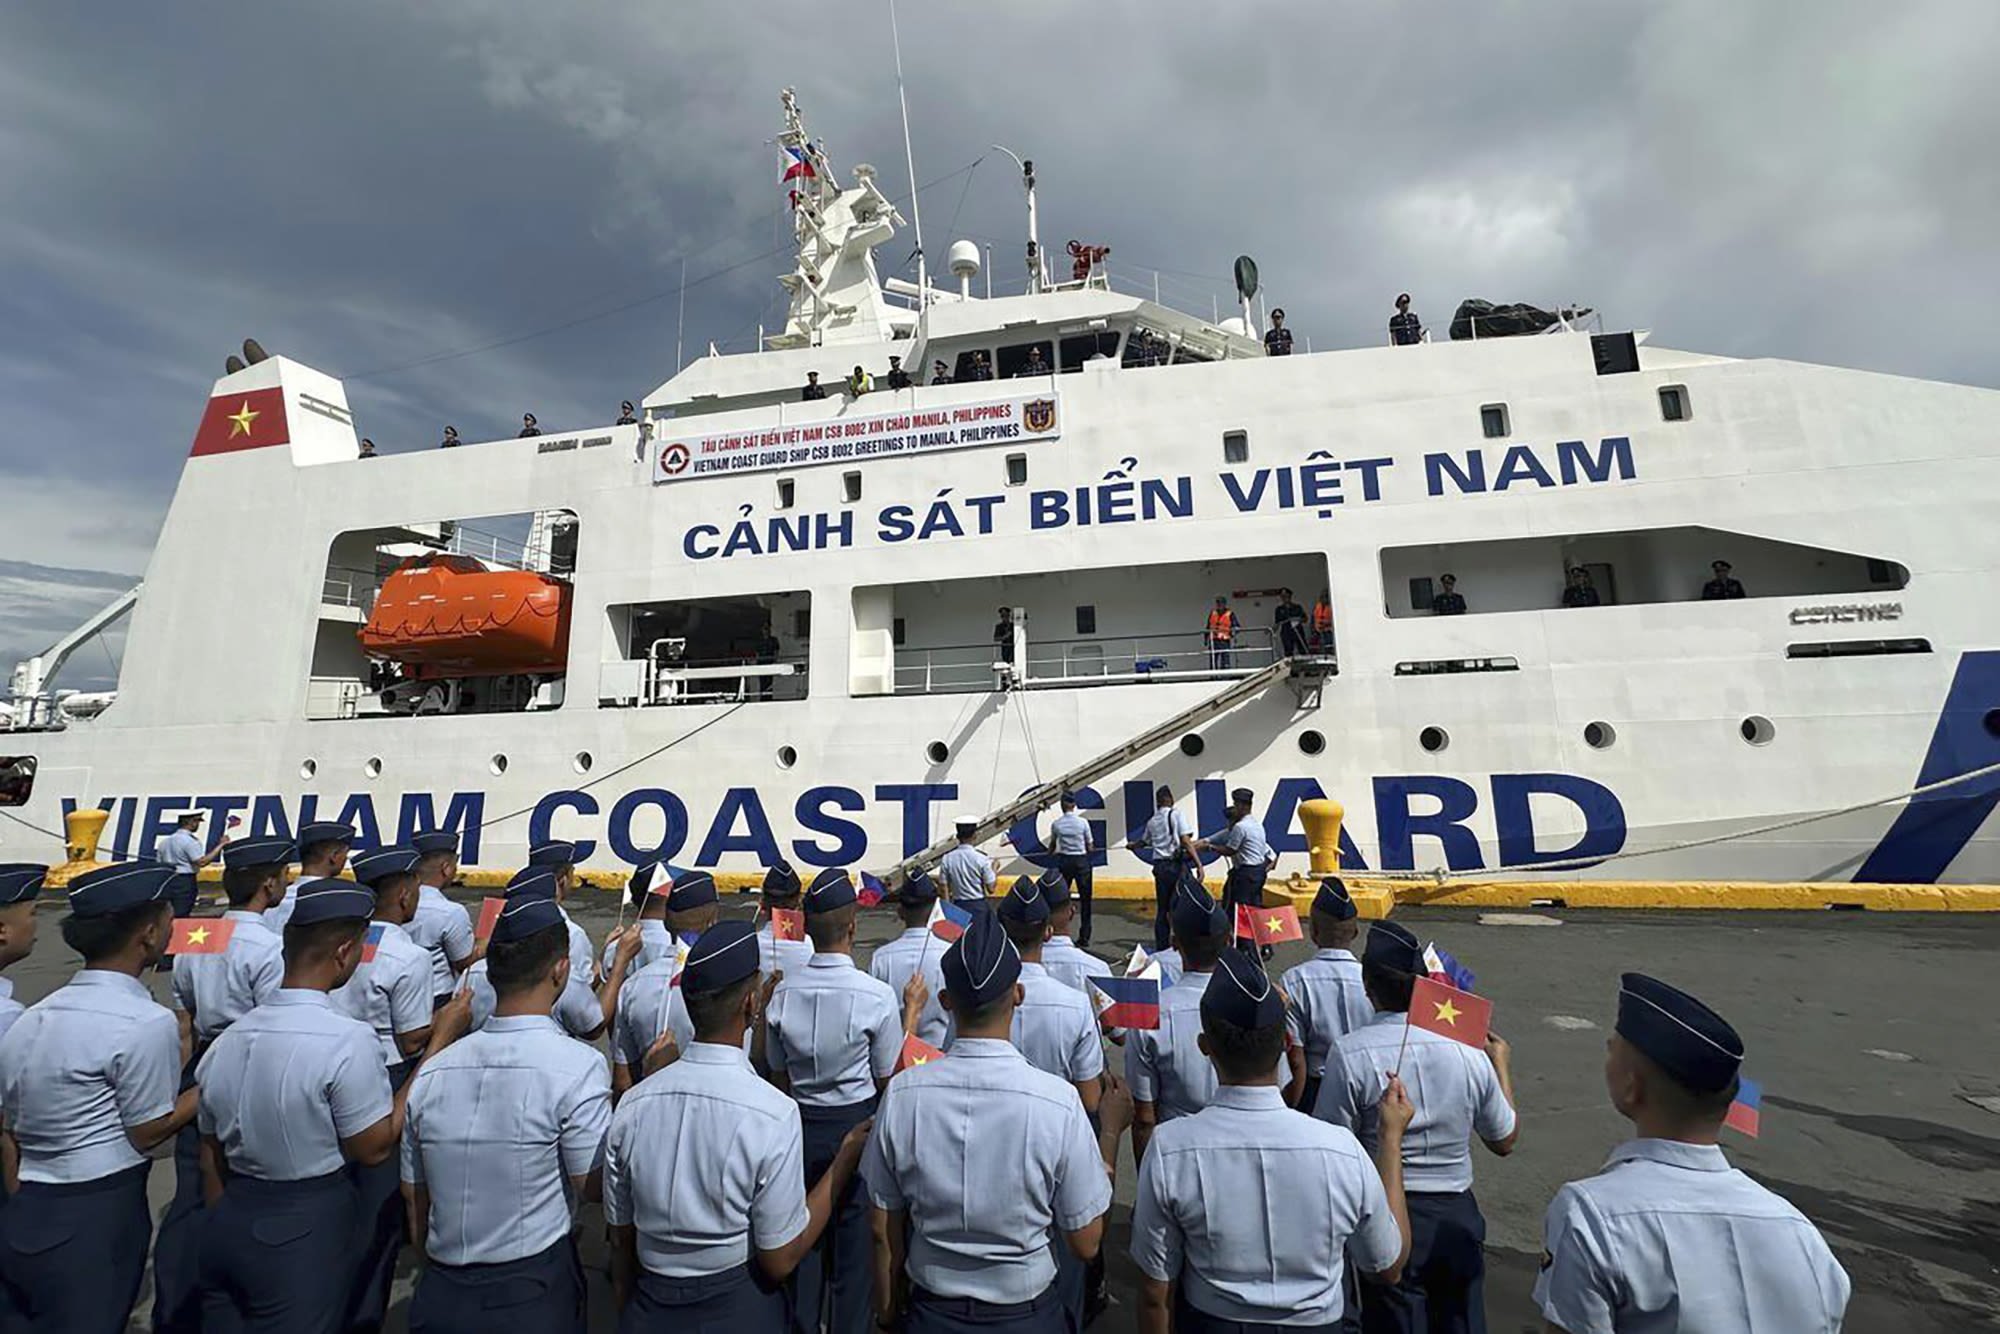 Vietnam's coast guard visits Philippines for joint drills as both face maritime tensions with China